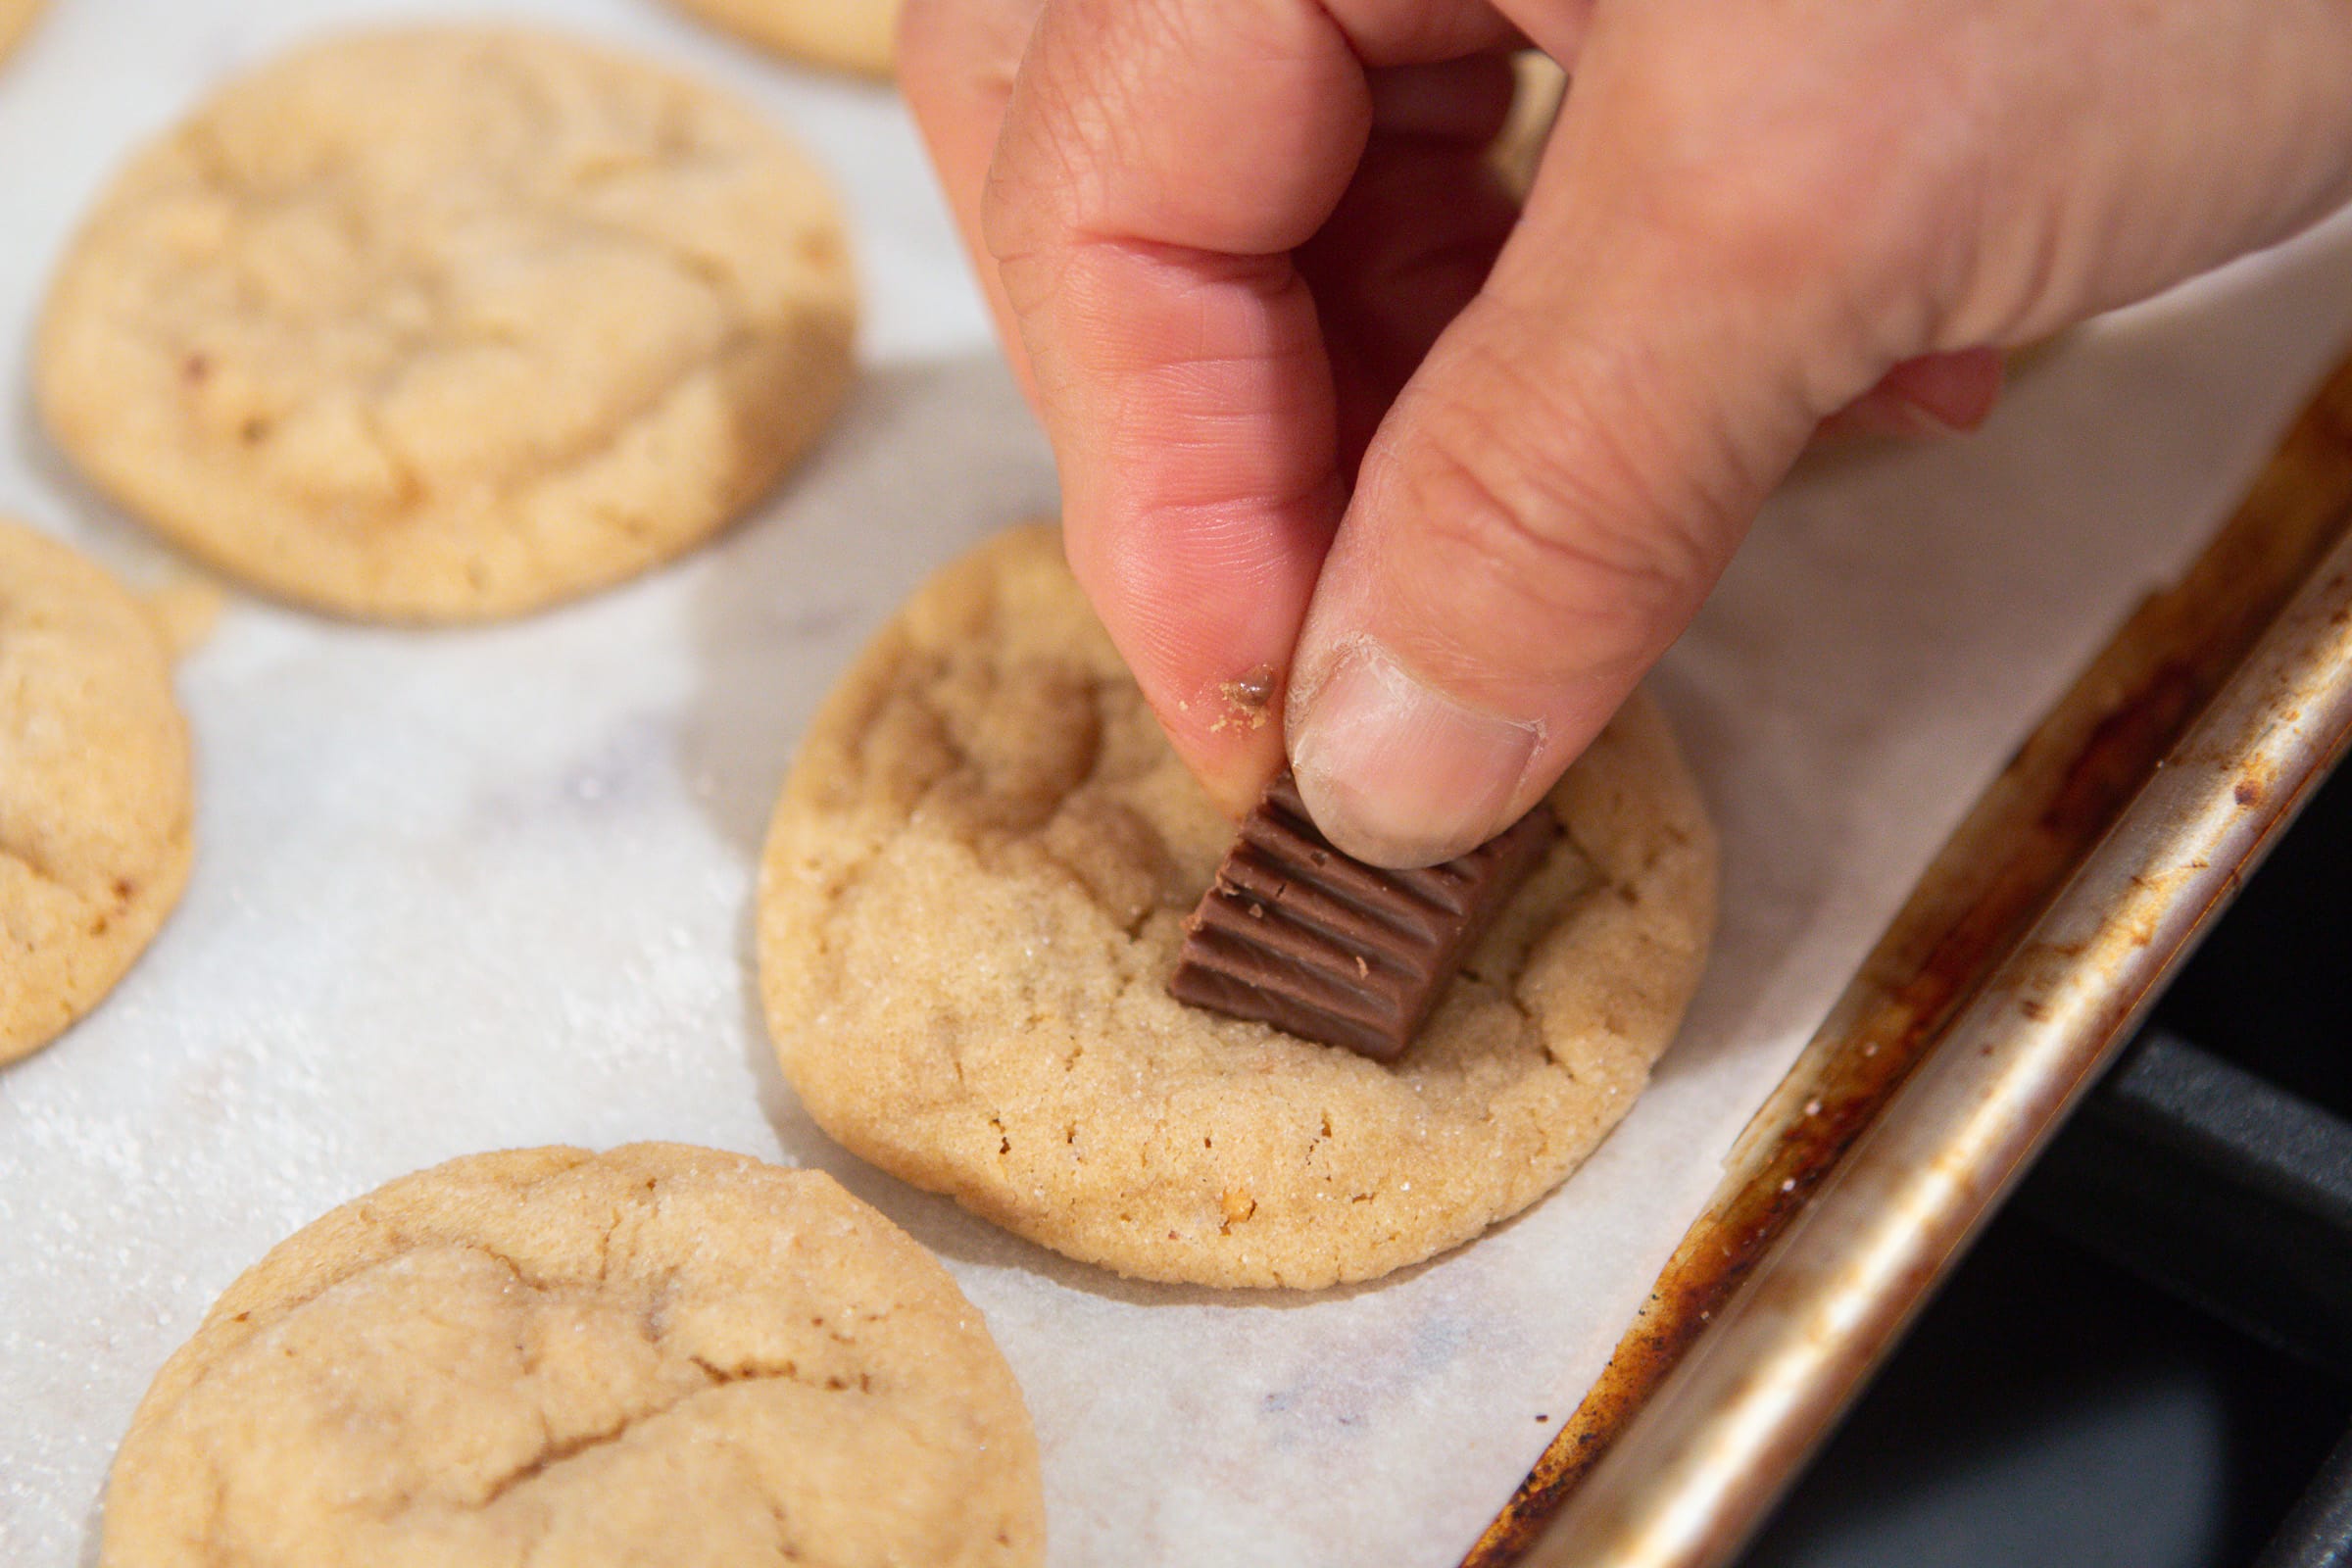 Adding peanut butter Reese's to the bottom of the cookie